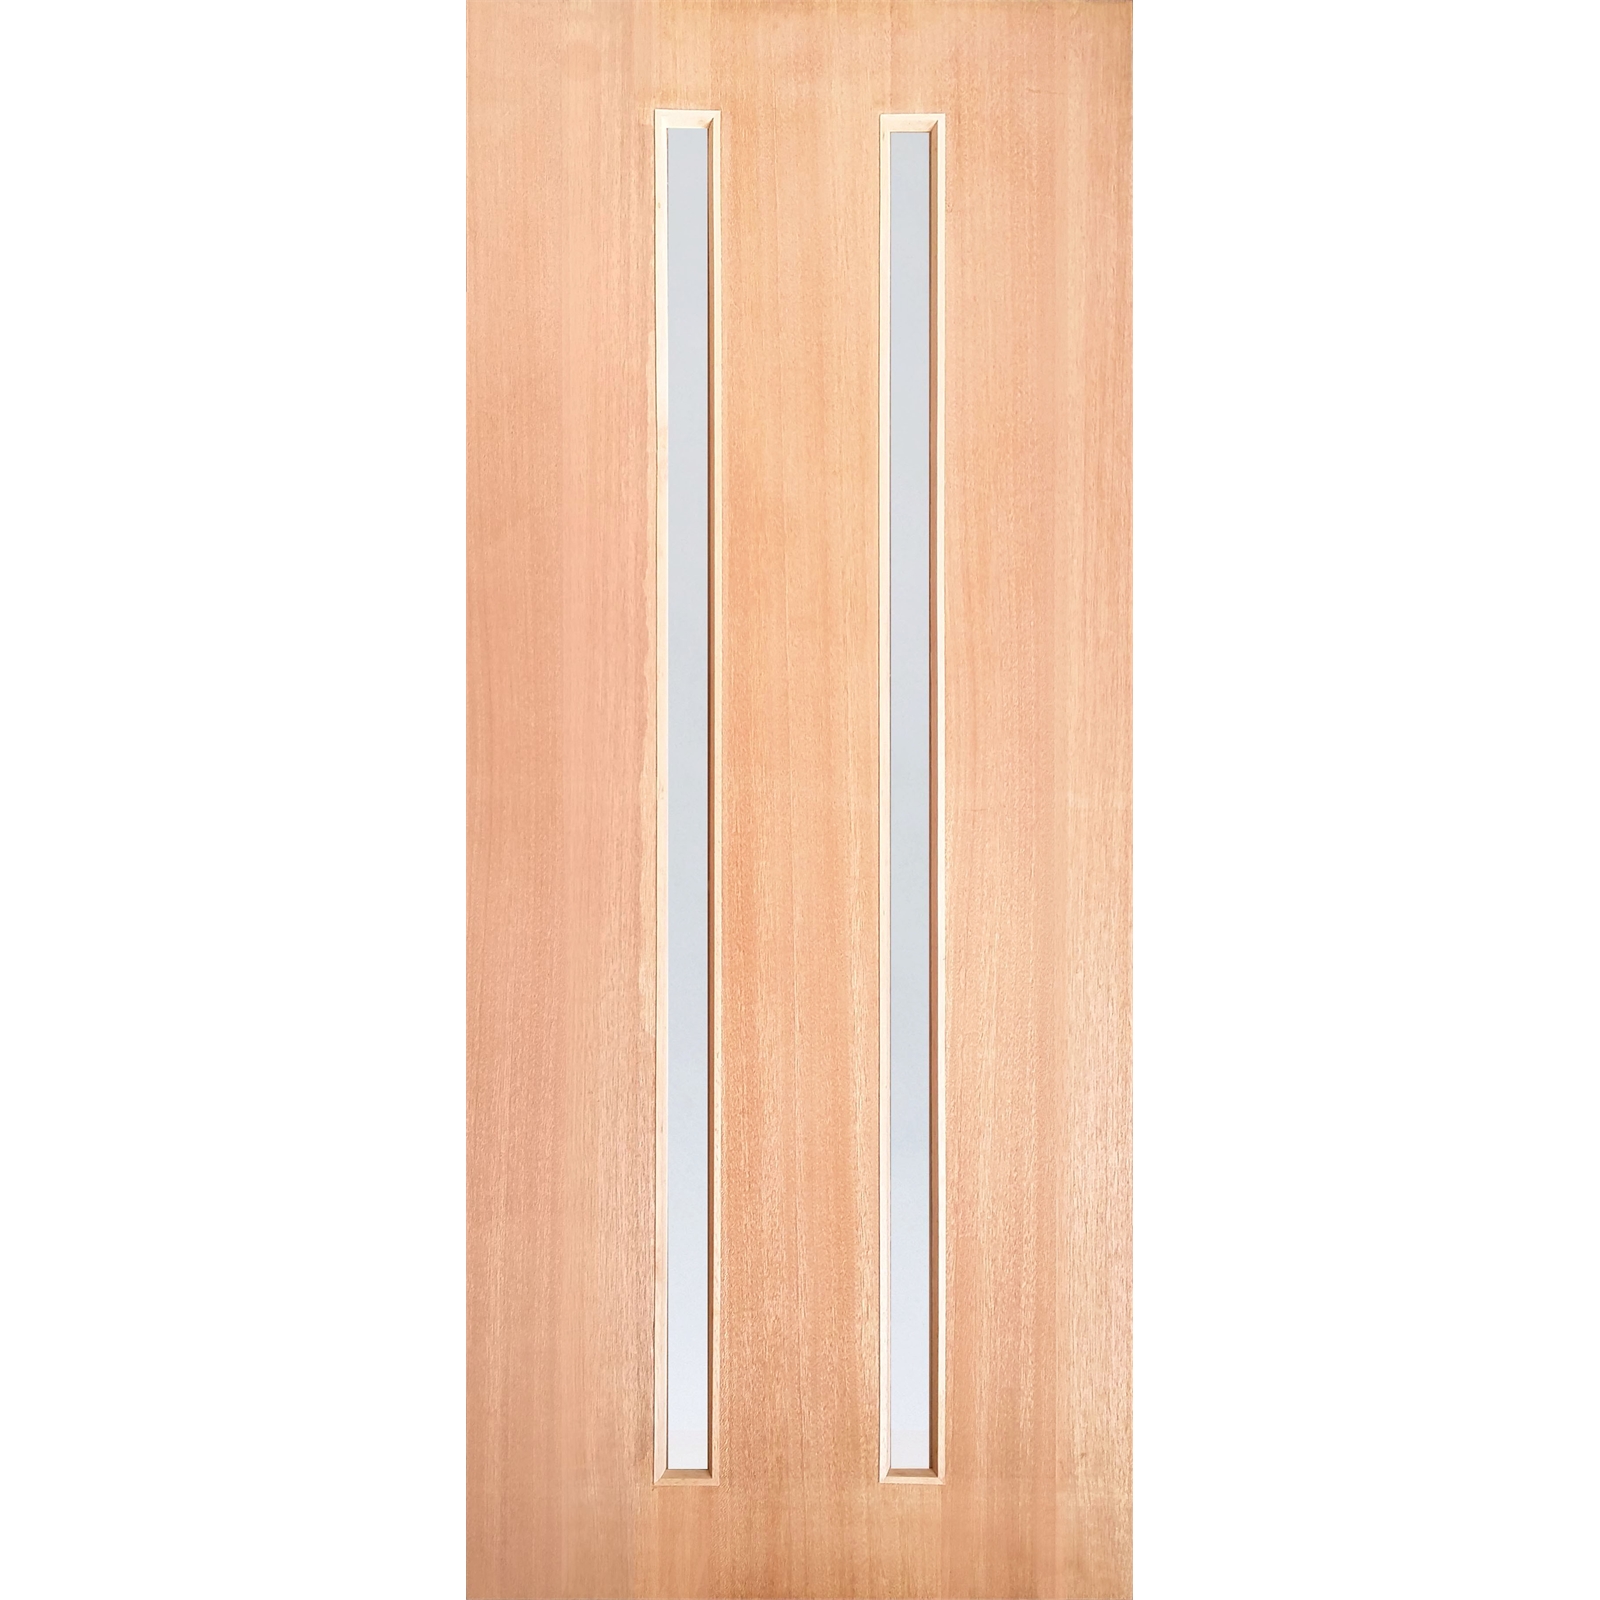 Woodcraft Doors 2040 x 820 x 40mm St Clair SD22 Entrance Door With Frosted Glass